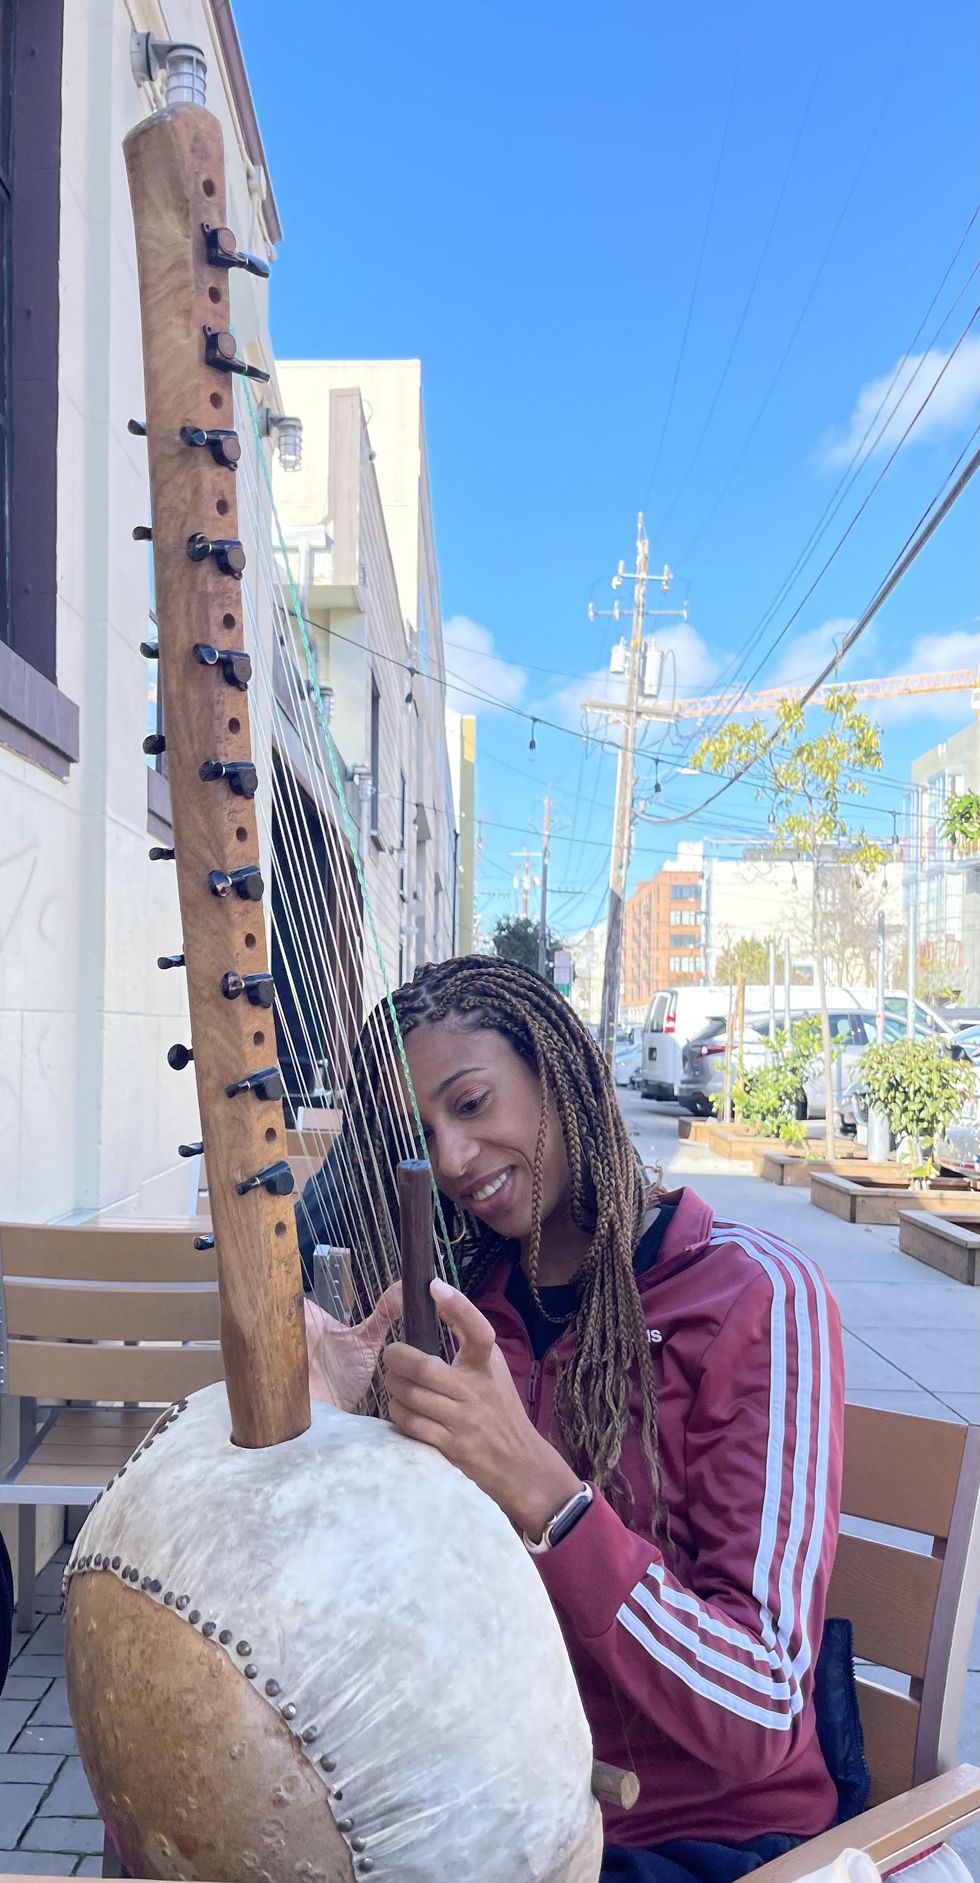 Cissoko, a Black woman with light brown braids, sits in a chair and plays the kora, a lute-like string instrument made of wood and leather. She wears a red jacket and sits outside on a sidewalk.